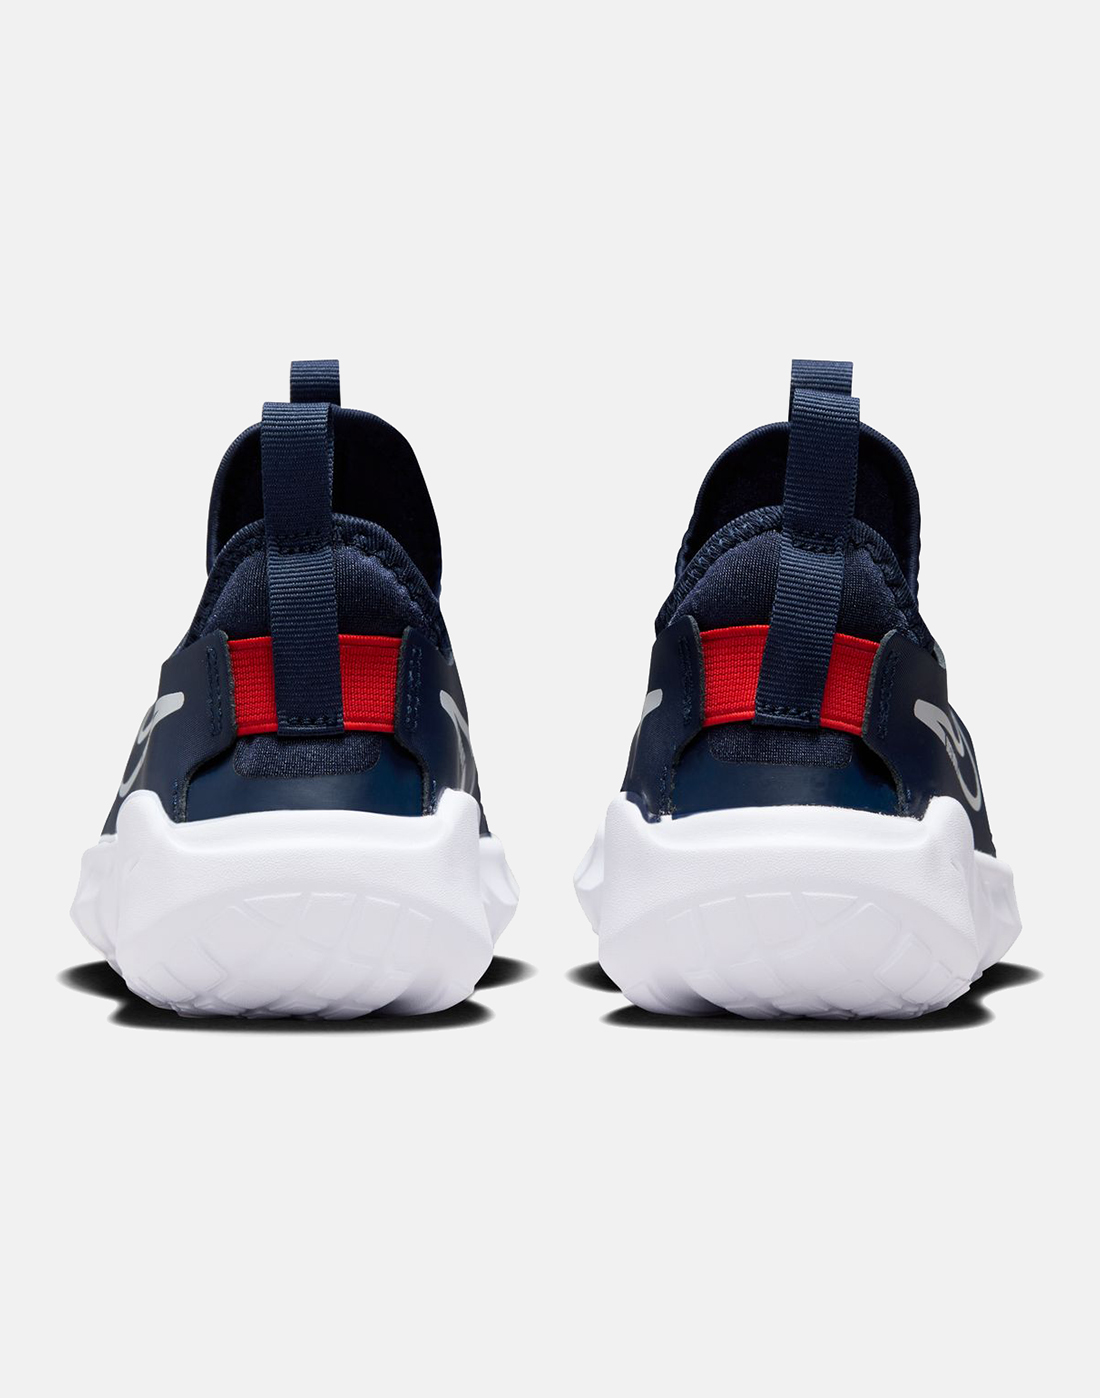 Nike Younger Kids Flex Runer 2 - Navy | Life Style Sports IE